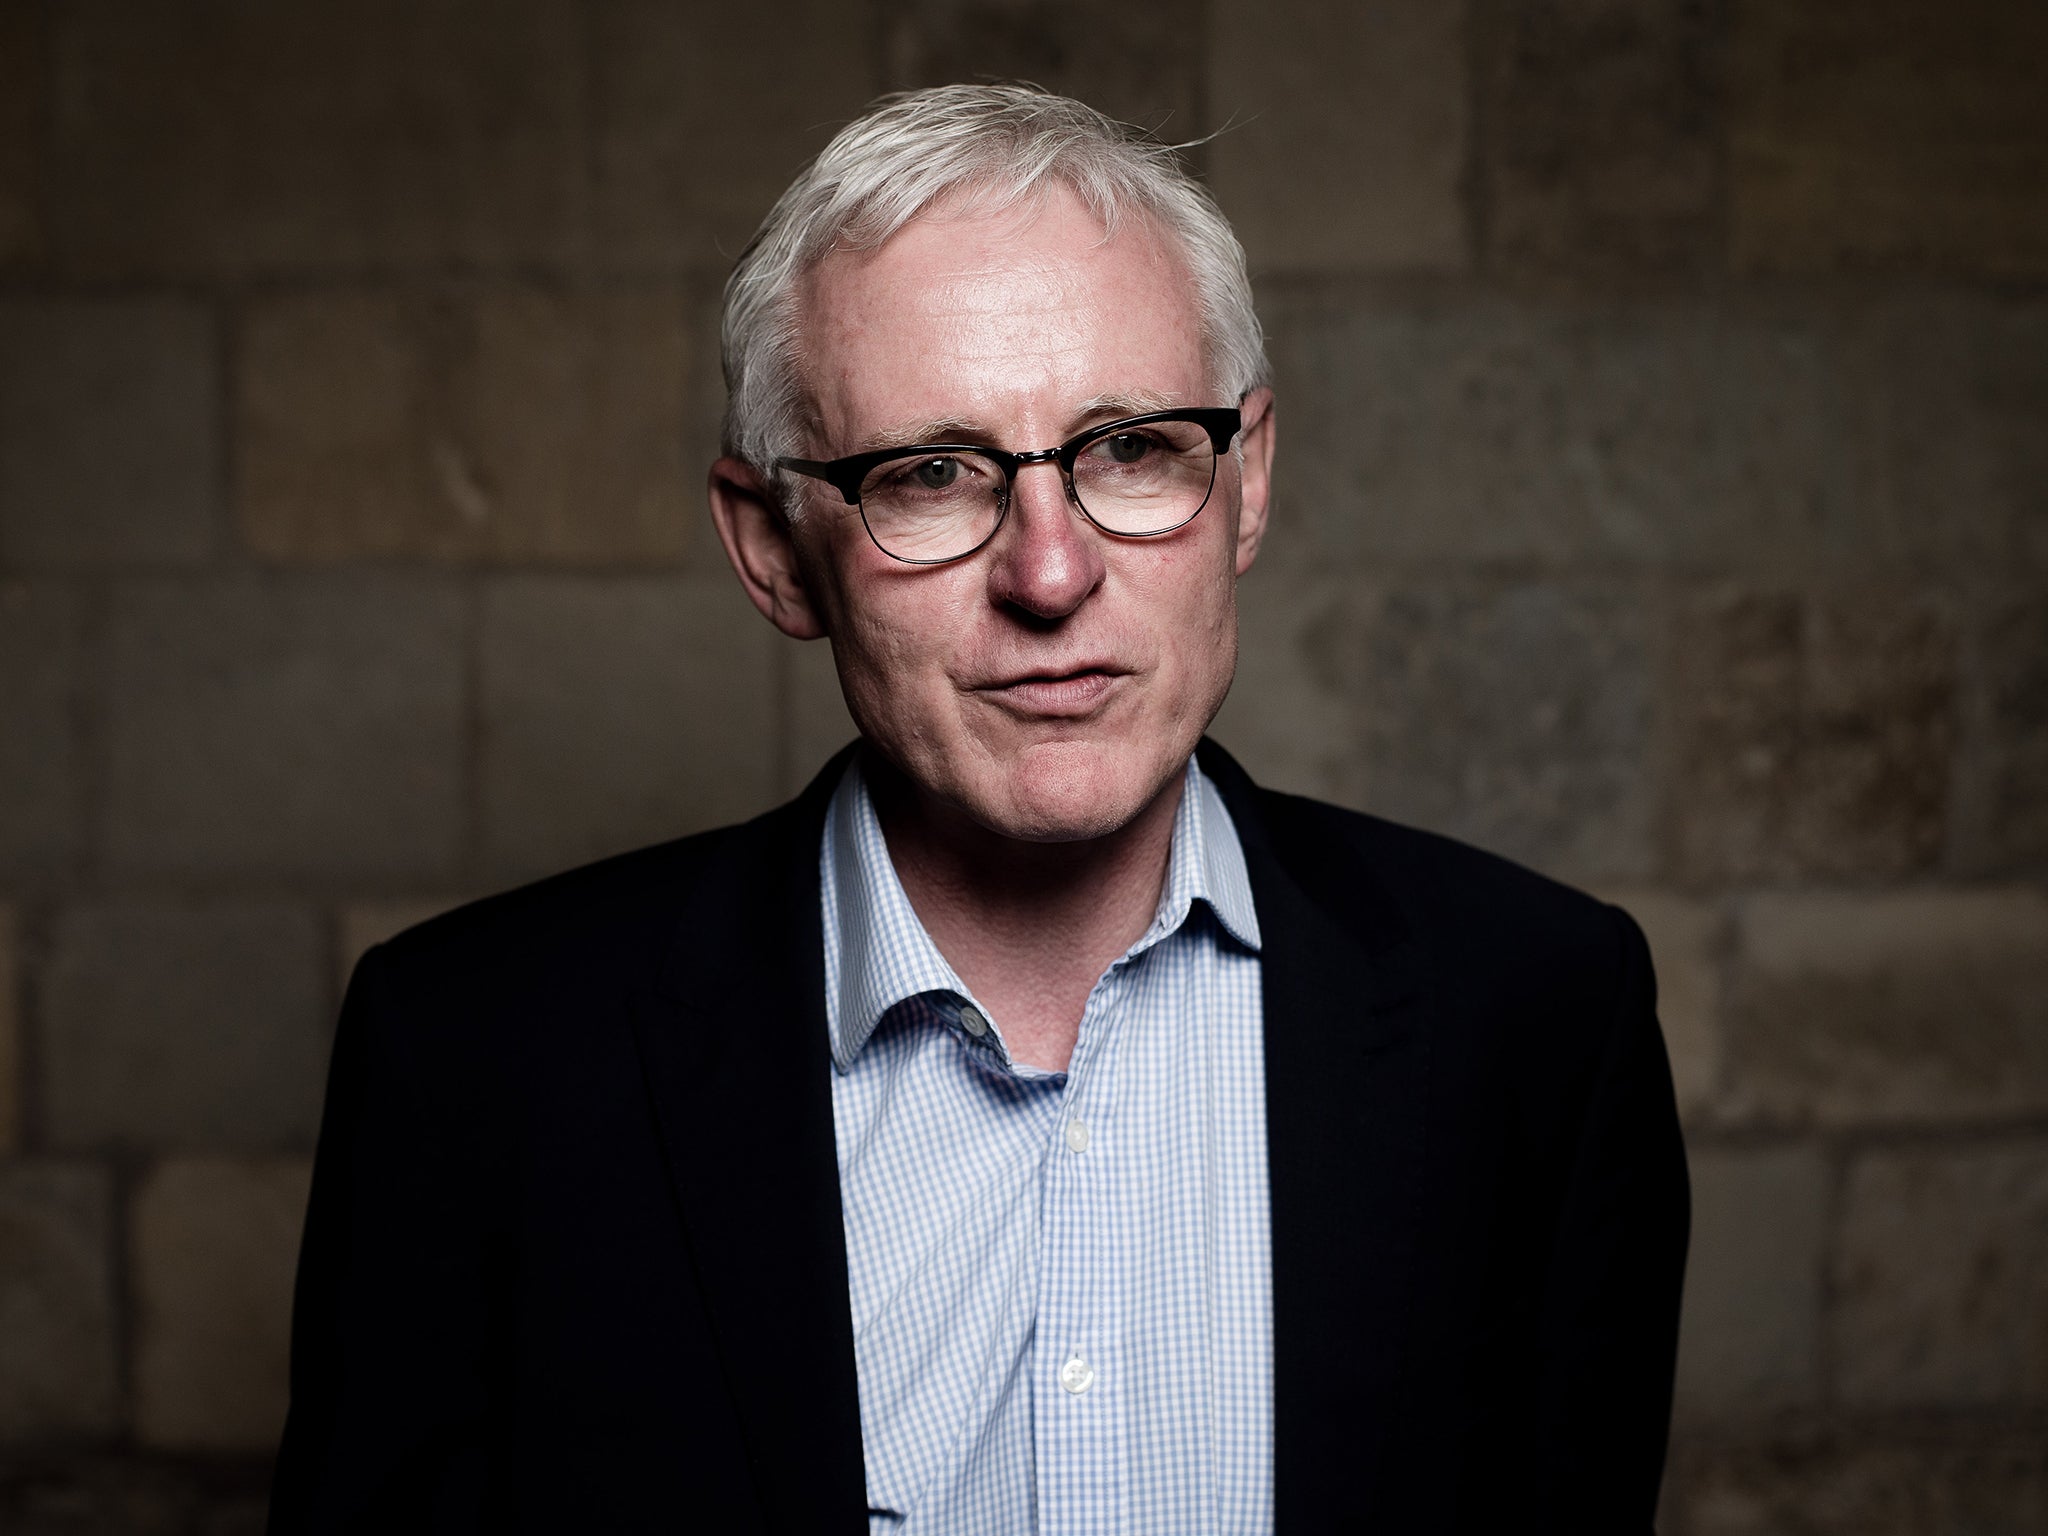 Norman Lamb said he had acted decisively with ‘no dithering’ over the issue